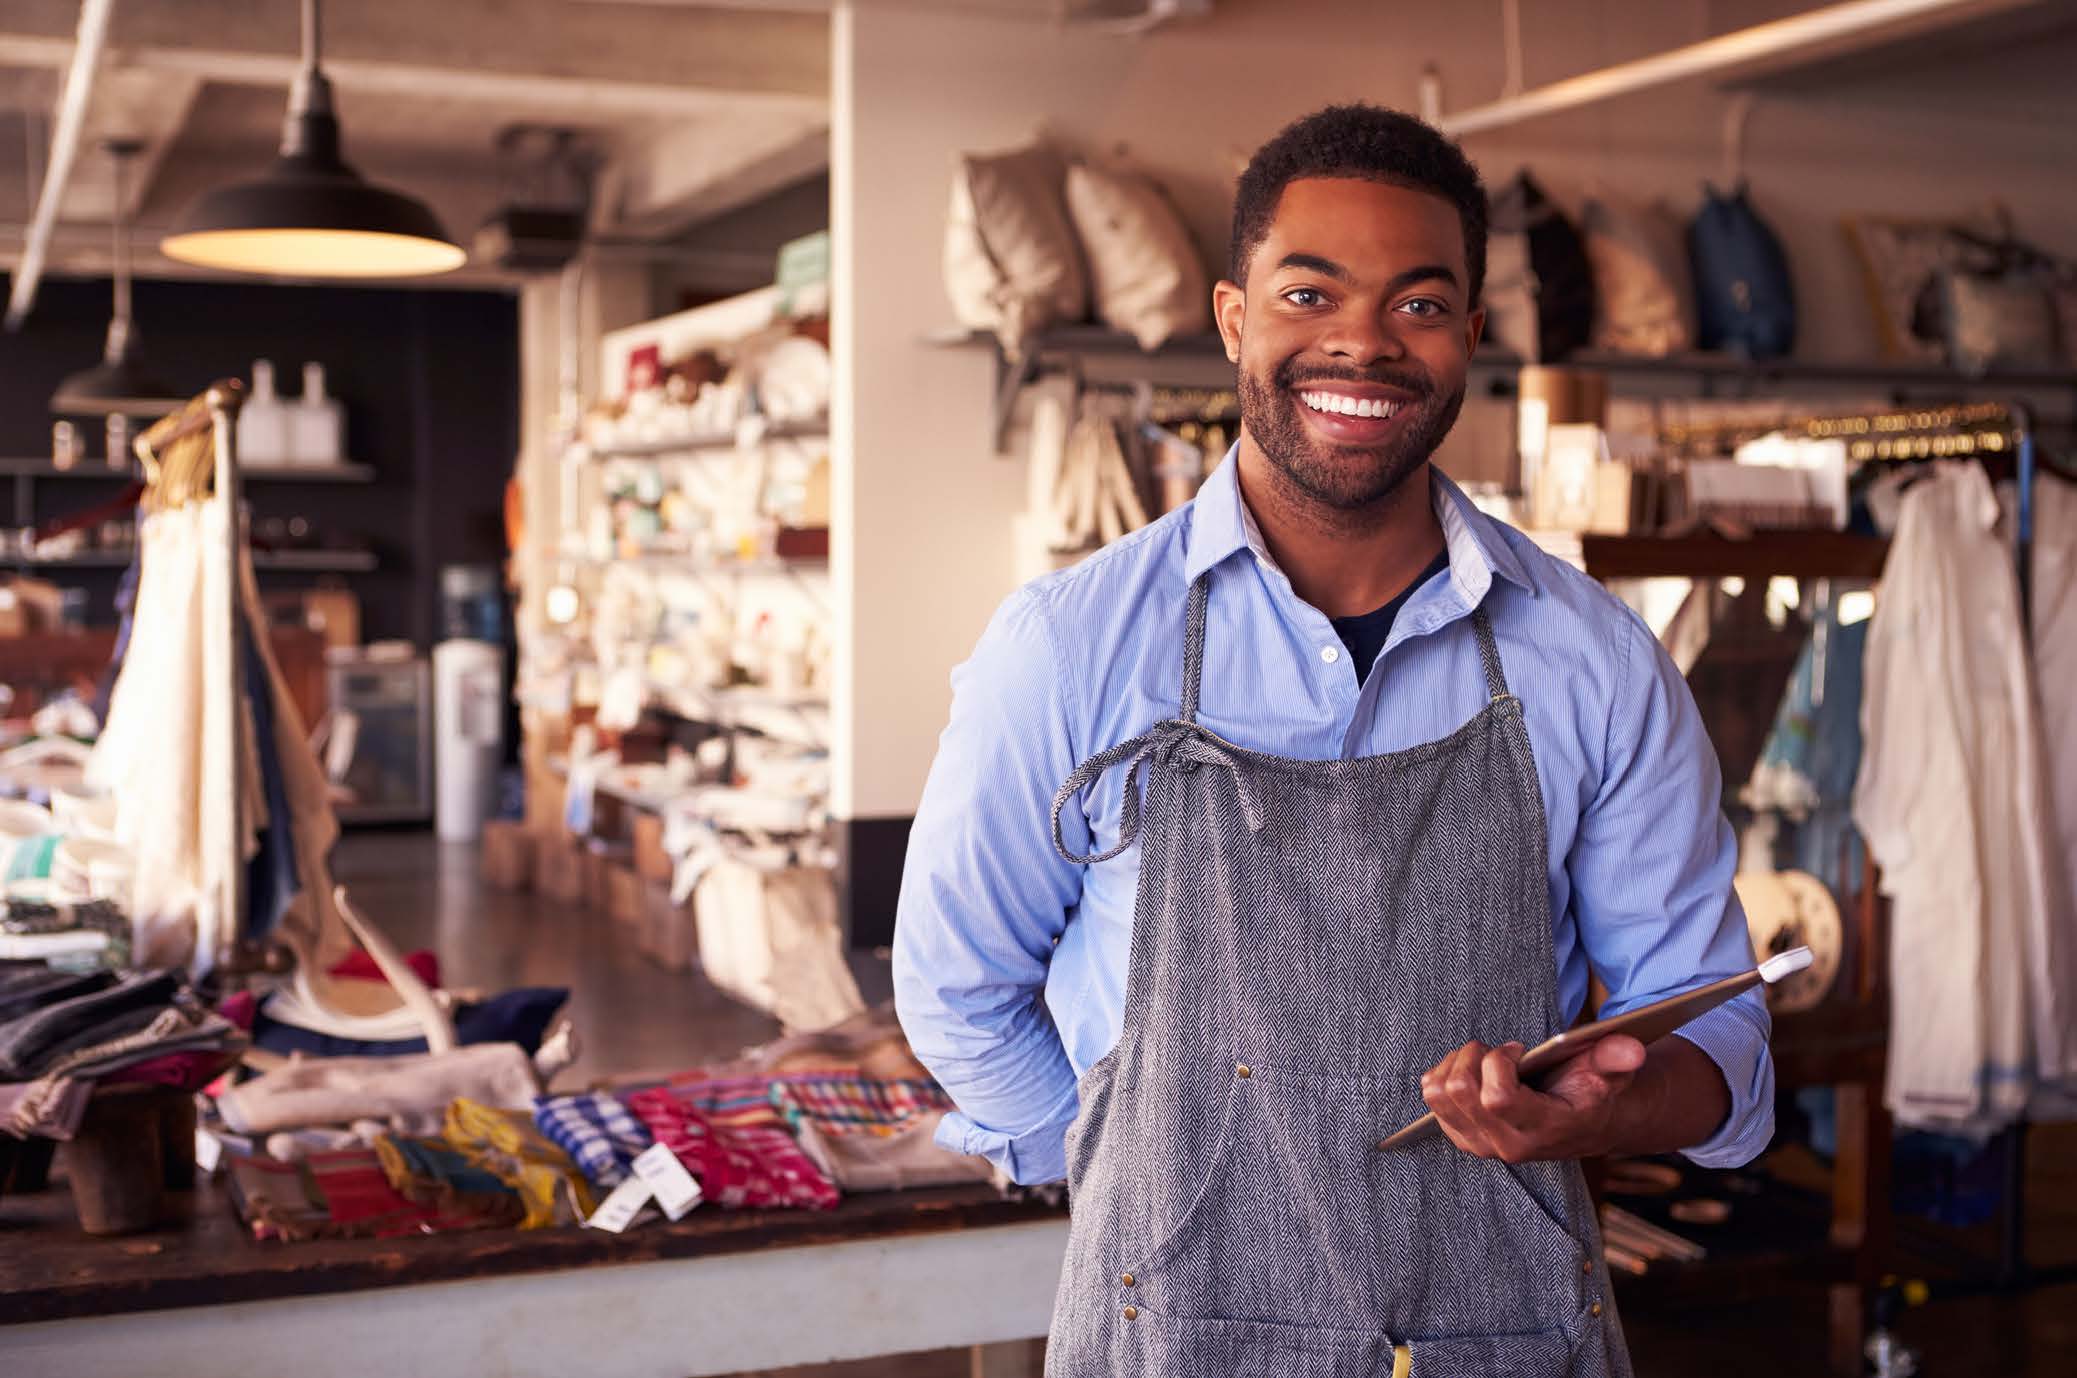 Male business owner smiling